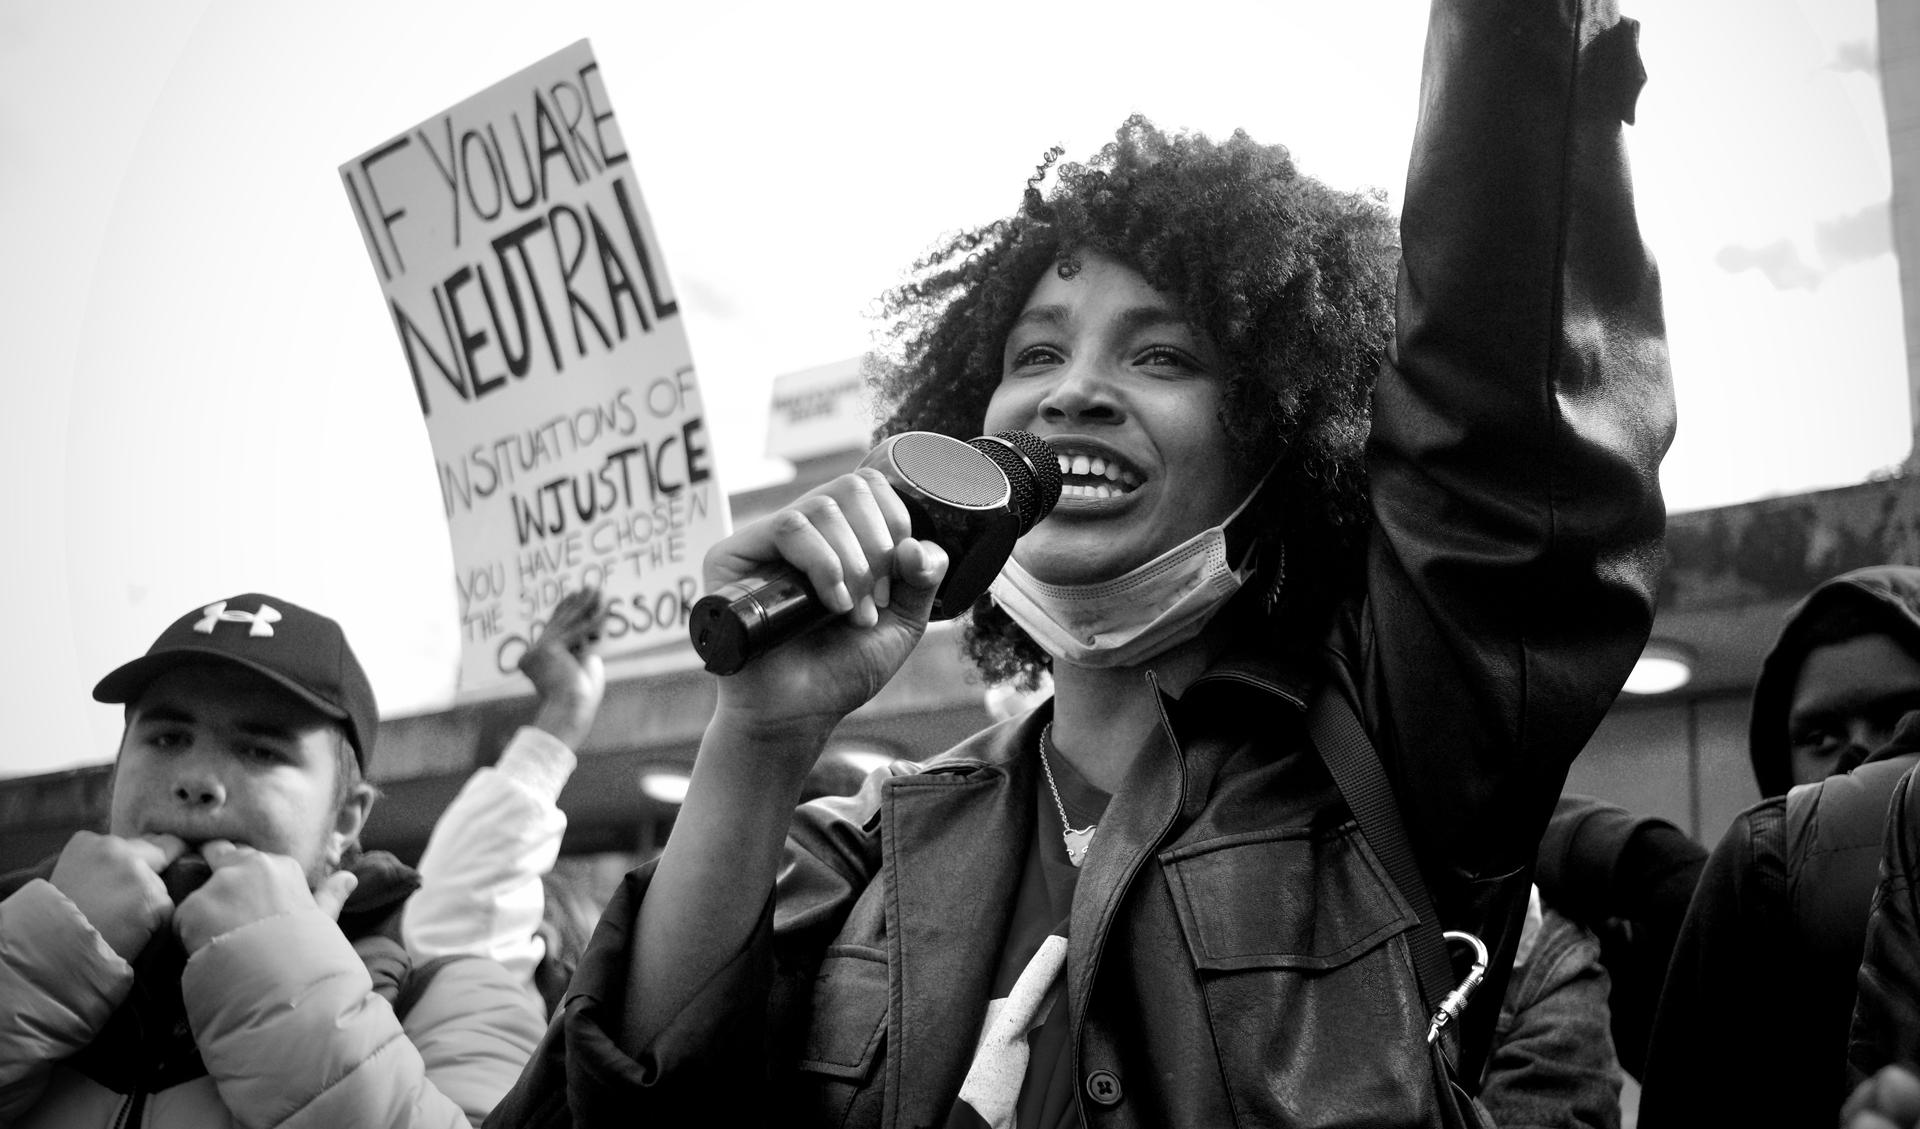 A person on a demonstration speaks into a micro